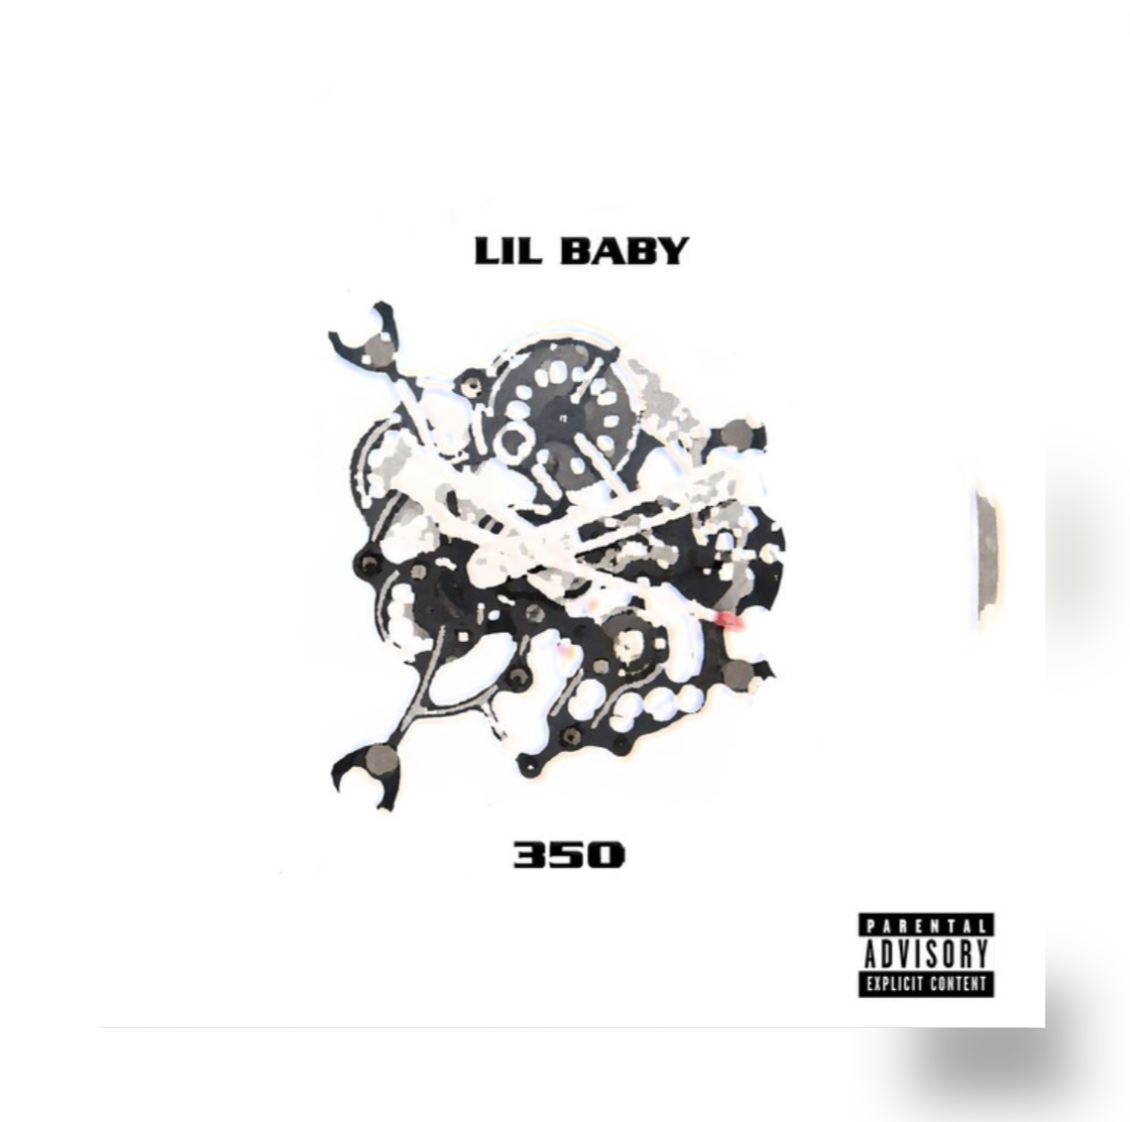 Lil Baby Surprises Us With Two-Pack Featuring “Crazy” & “350”